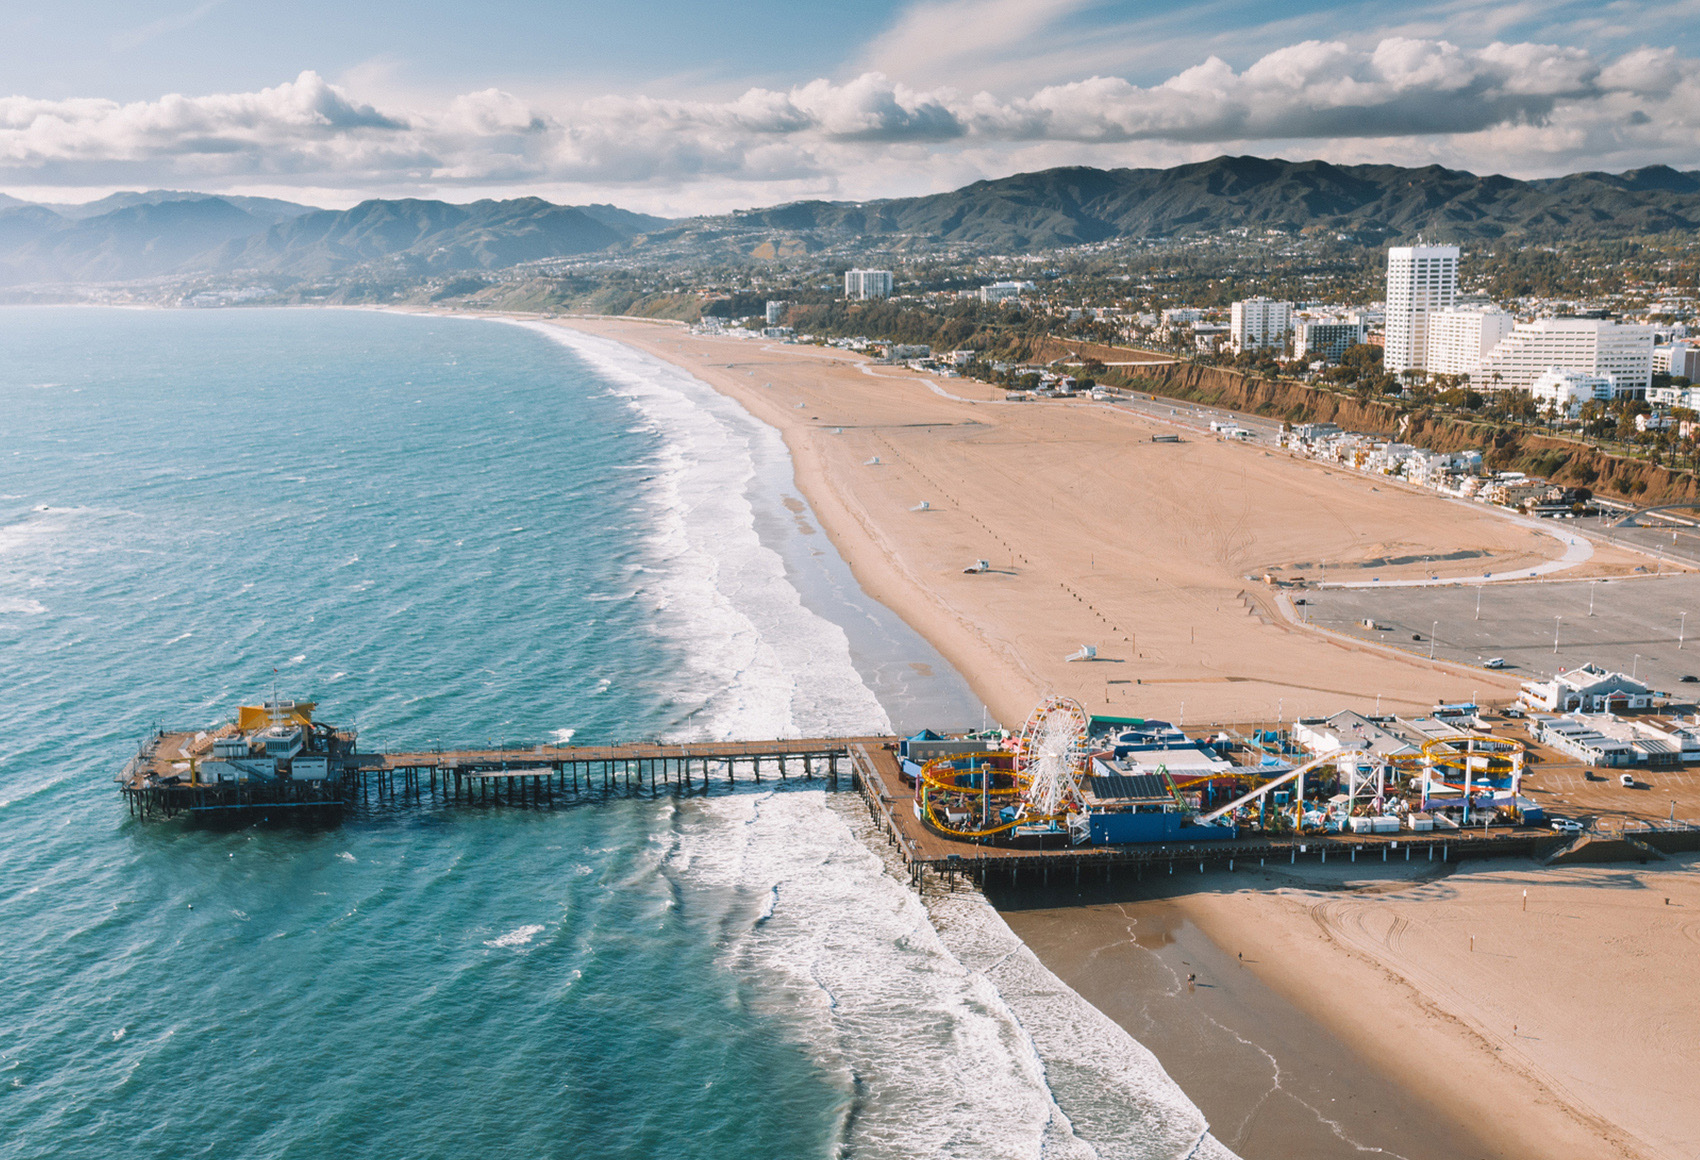 View of the Santa Monica State Beach Pier and the ocean